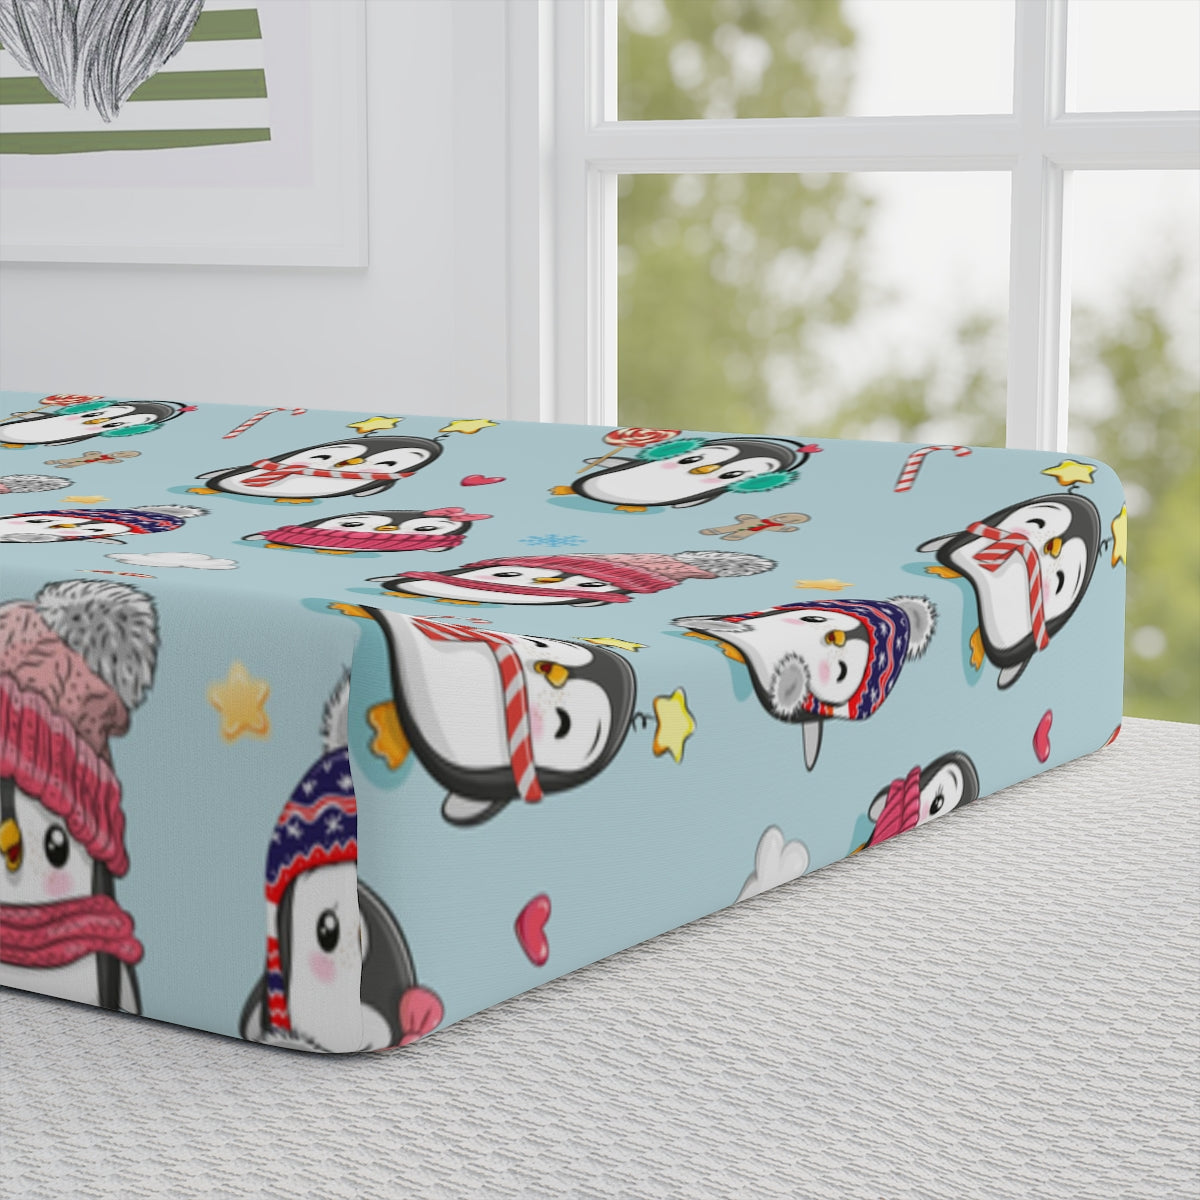 Penguins in Winter Clothes Baby Changing Pad Cover